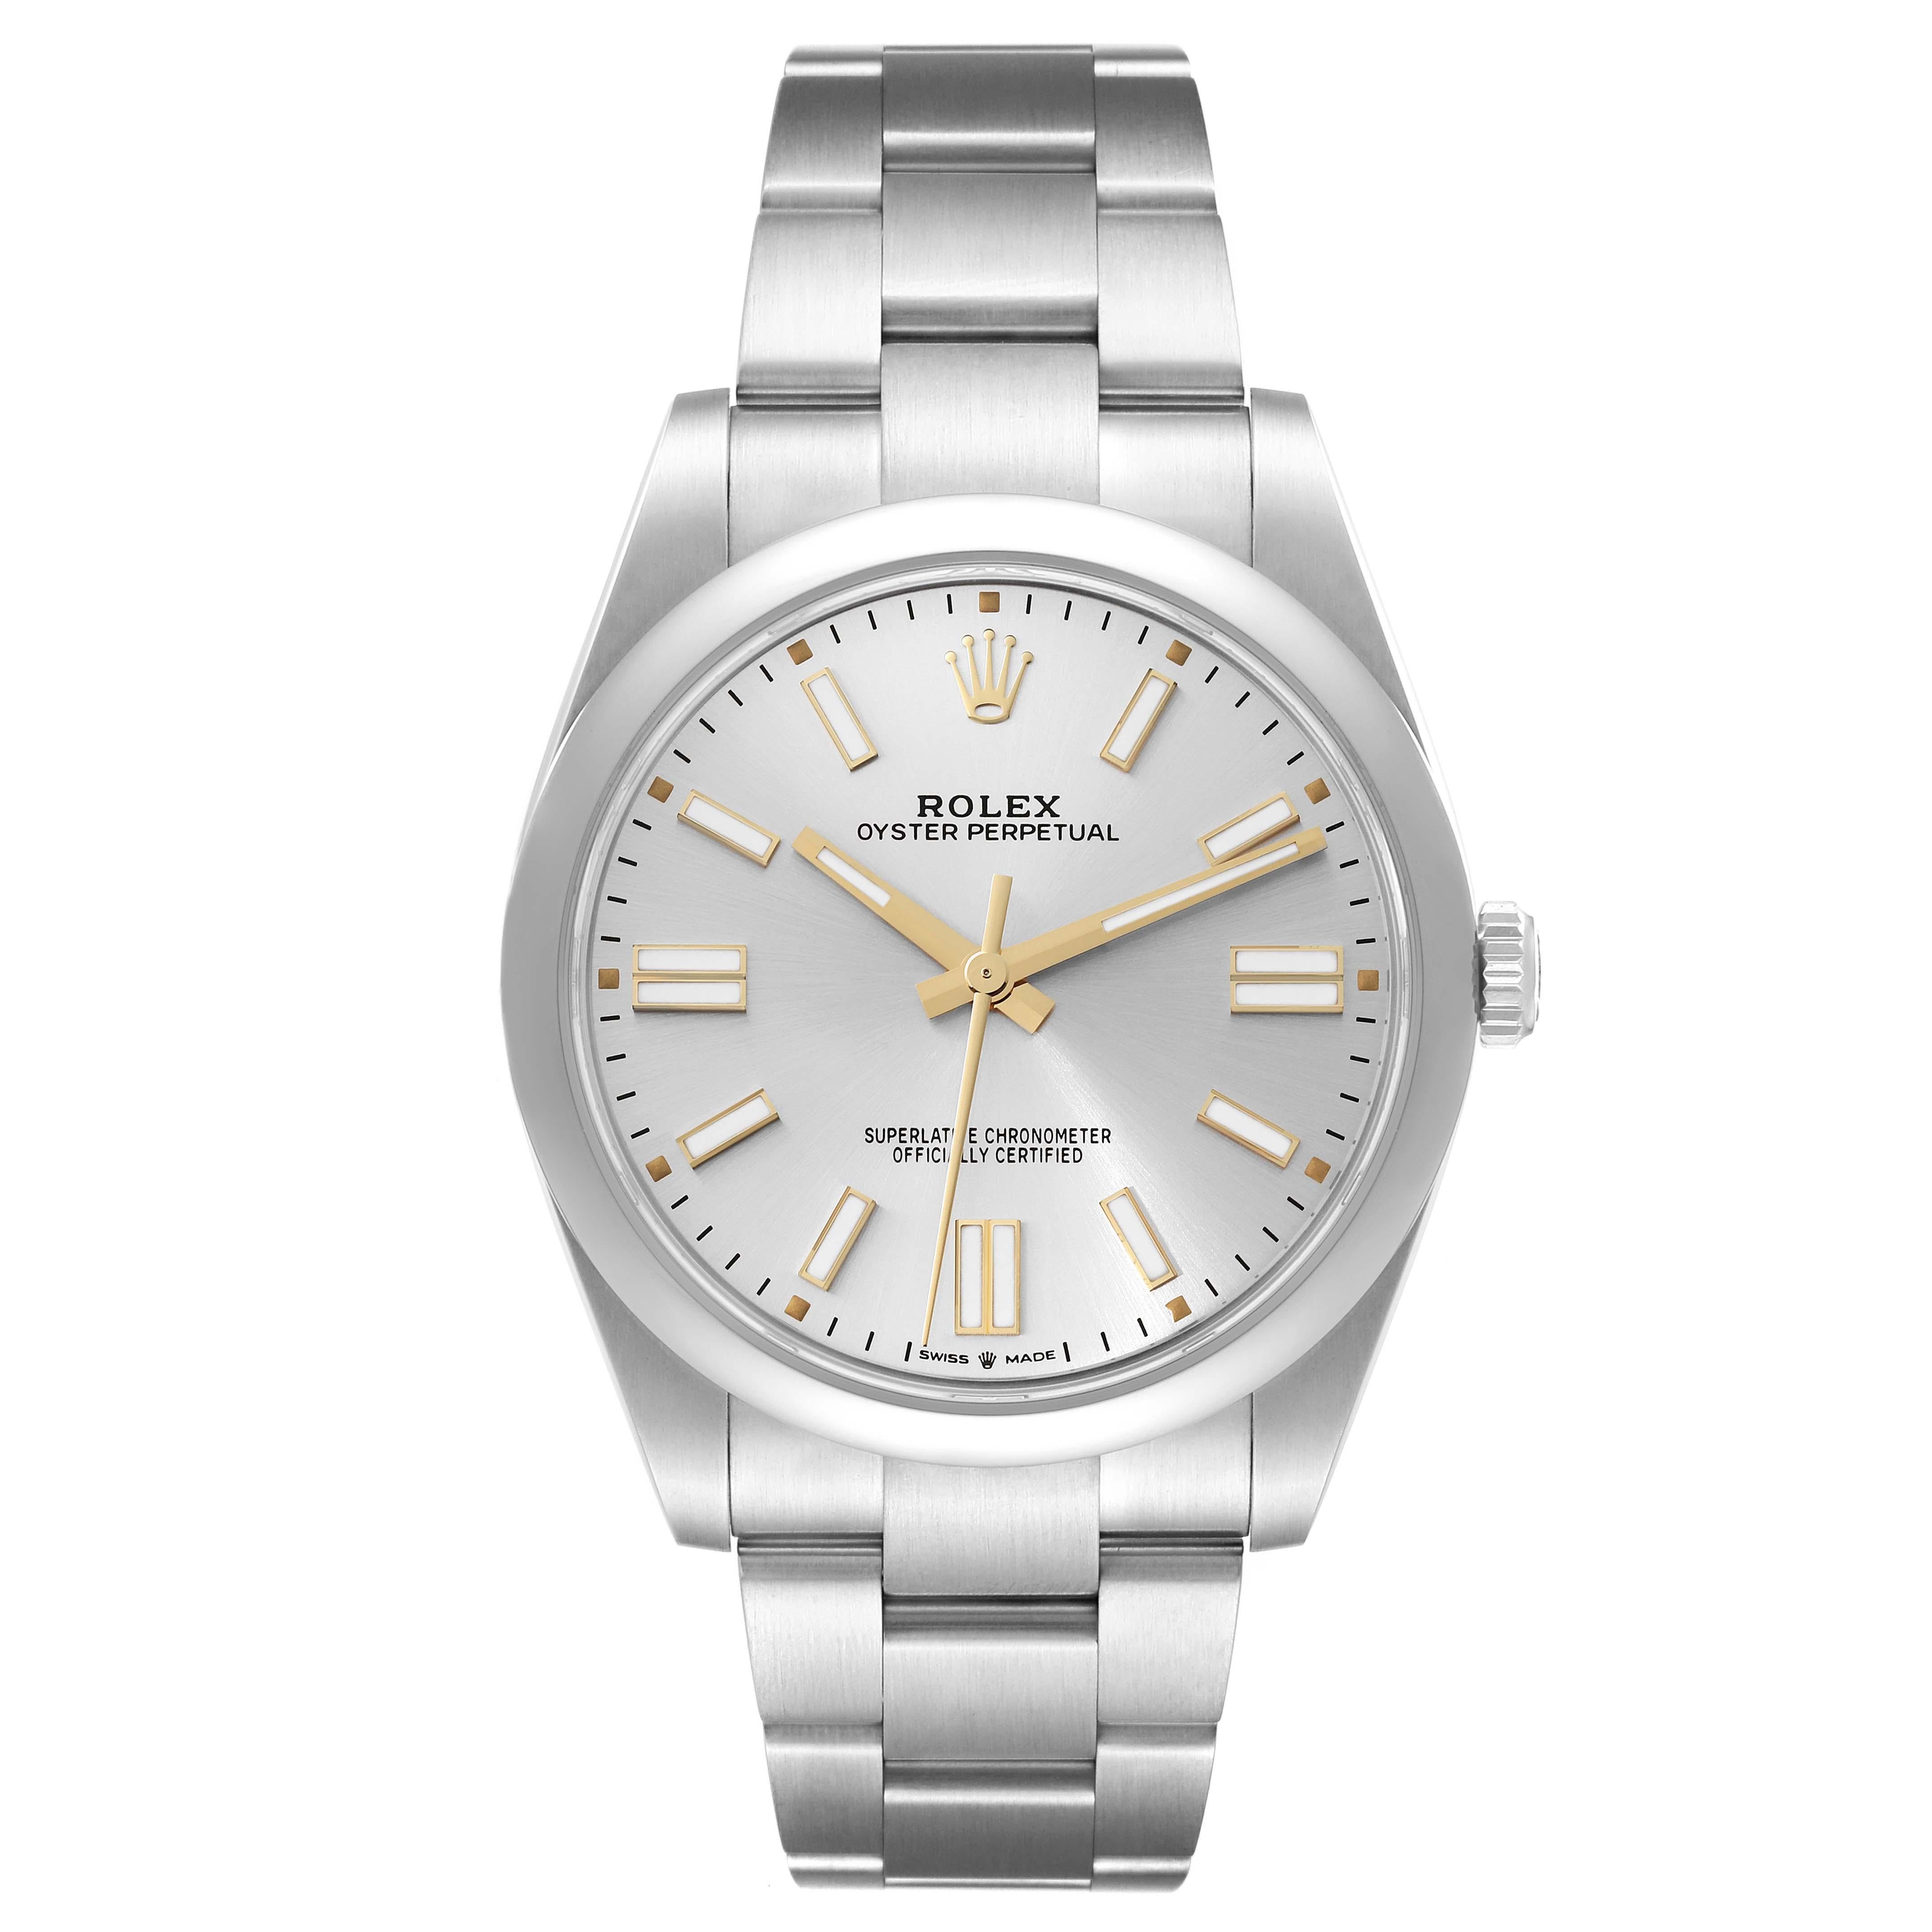 Rolex Oyster Perpetual 41 Silver Dial Steel Mens Watch 124300. Officially certified chronometer automatic self-winding movement. Stainless steel case 41 mm in diameter. Rolex logo on the crown. Stainless steel smooth bezel. Scratch resistant